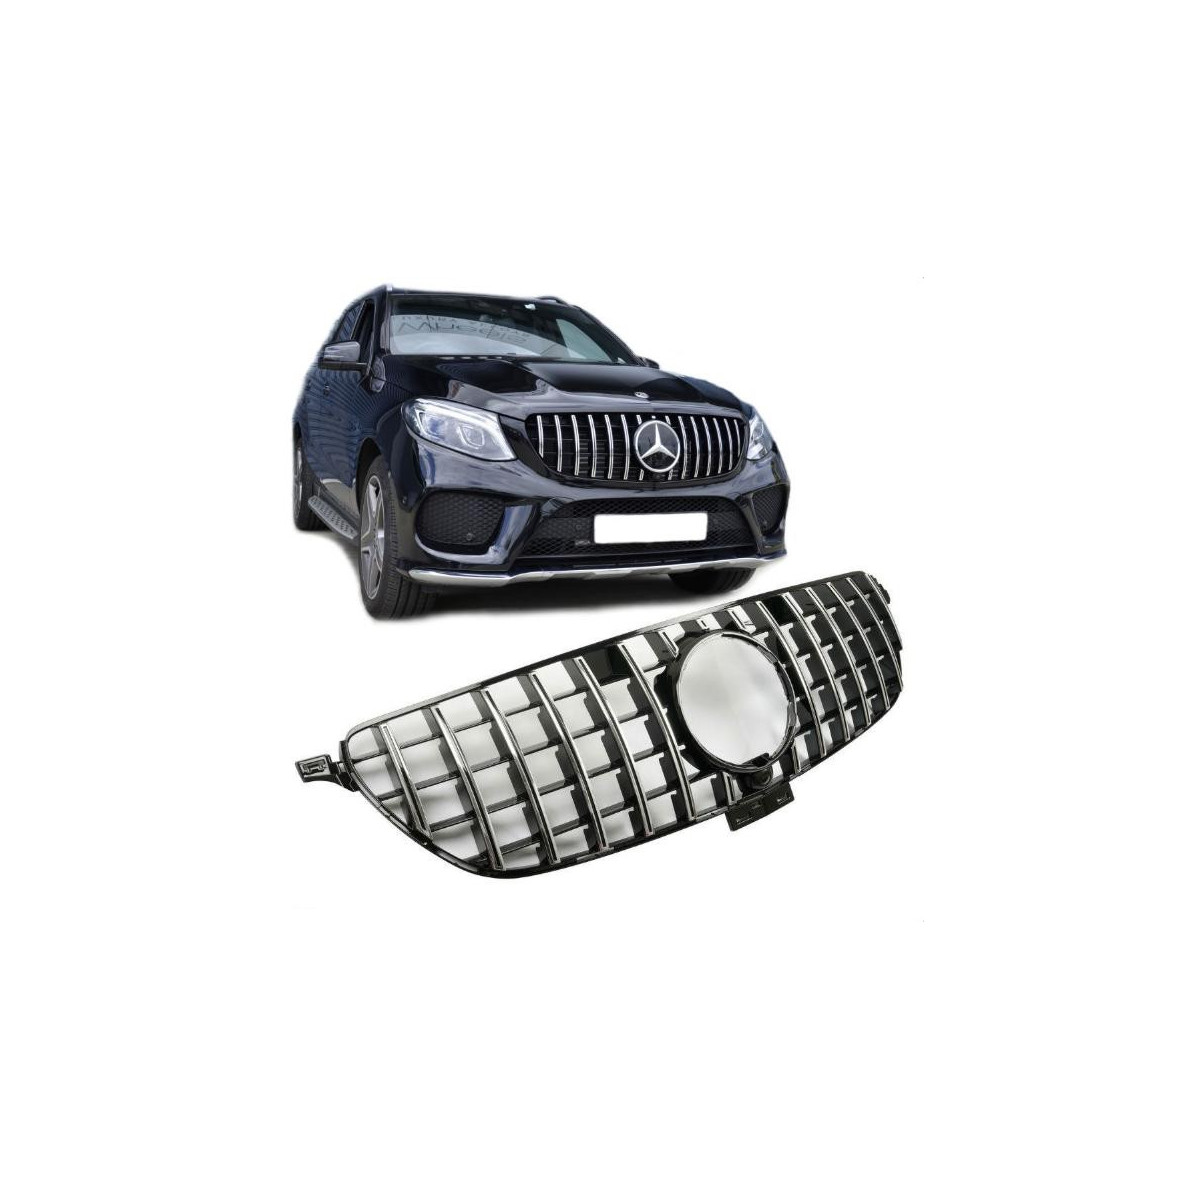 GRILL MERCEDES C292 GLE COUPE PANAMERICANA BC AMG